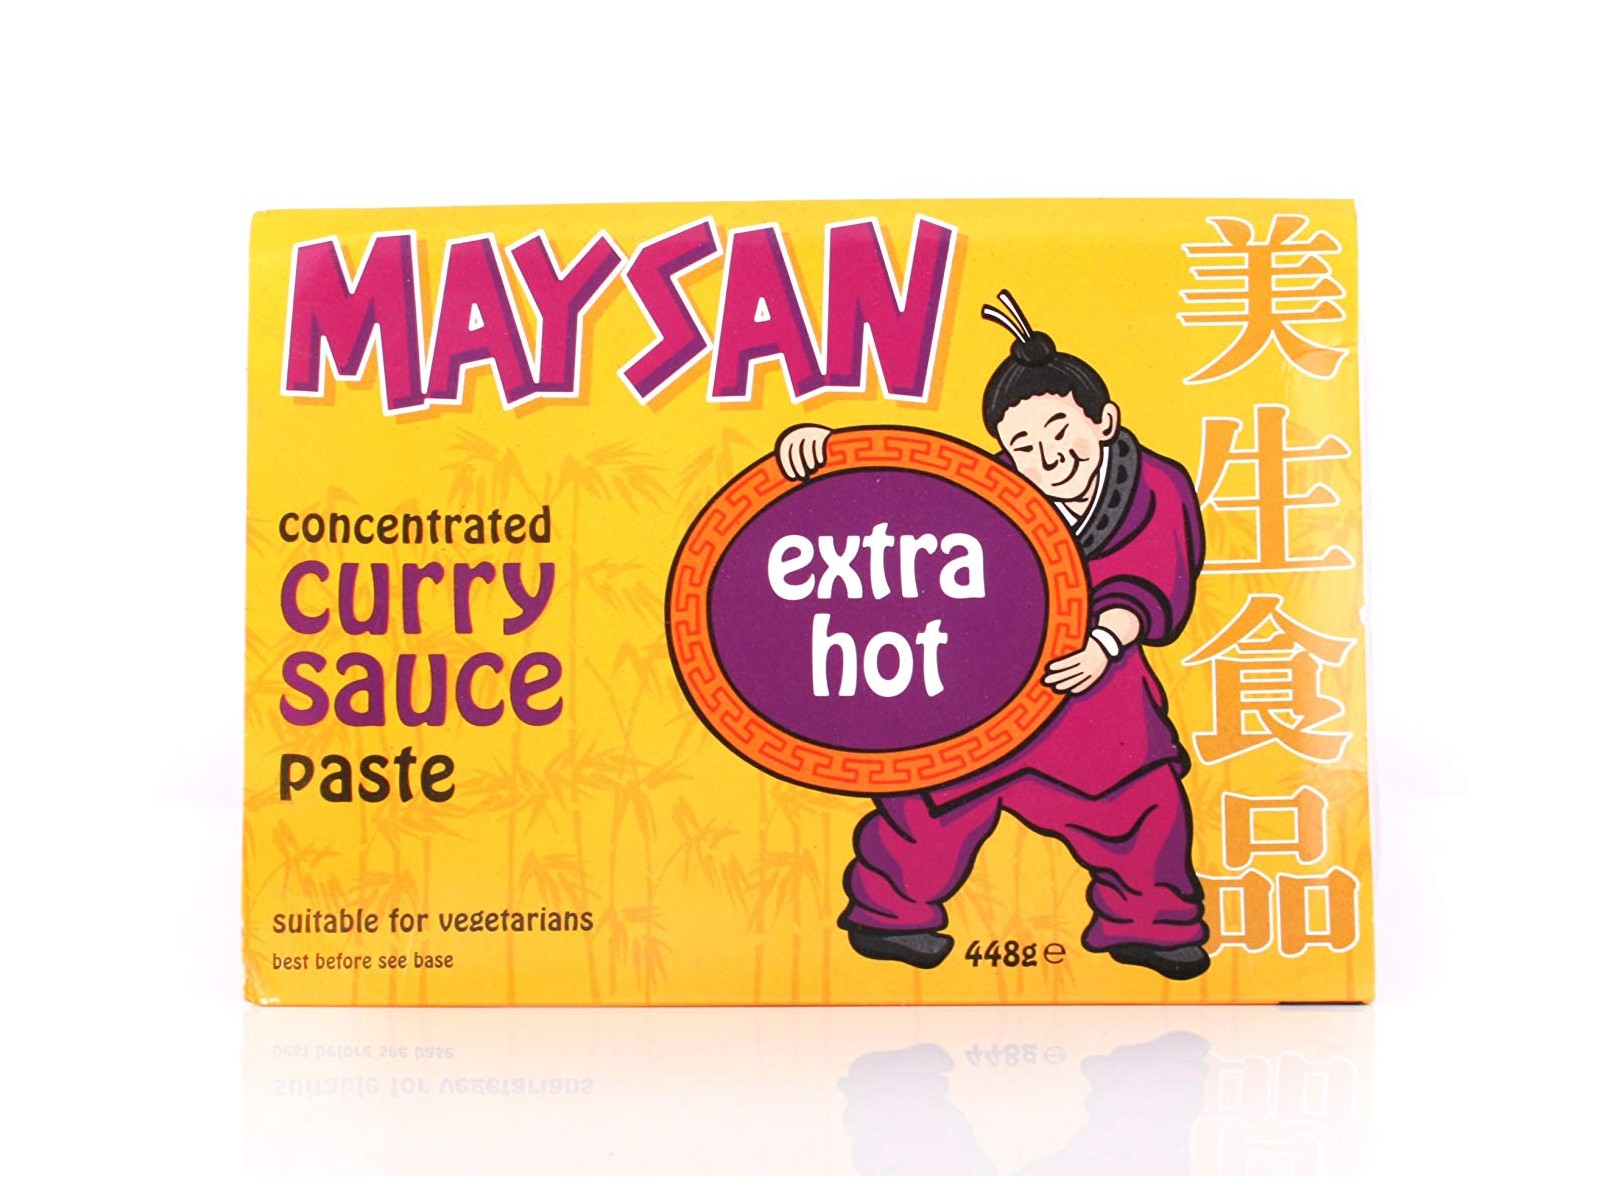 Maysan Concentrated Curry Sauce Paste - Extra Hot 448g - Cooking Sa...